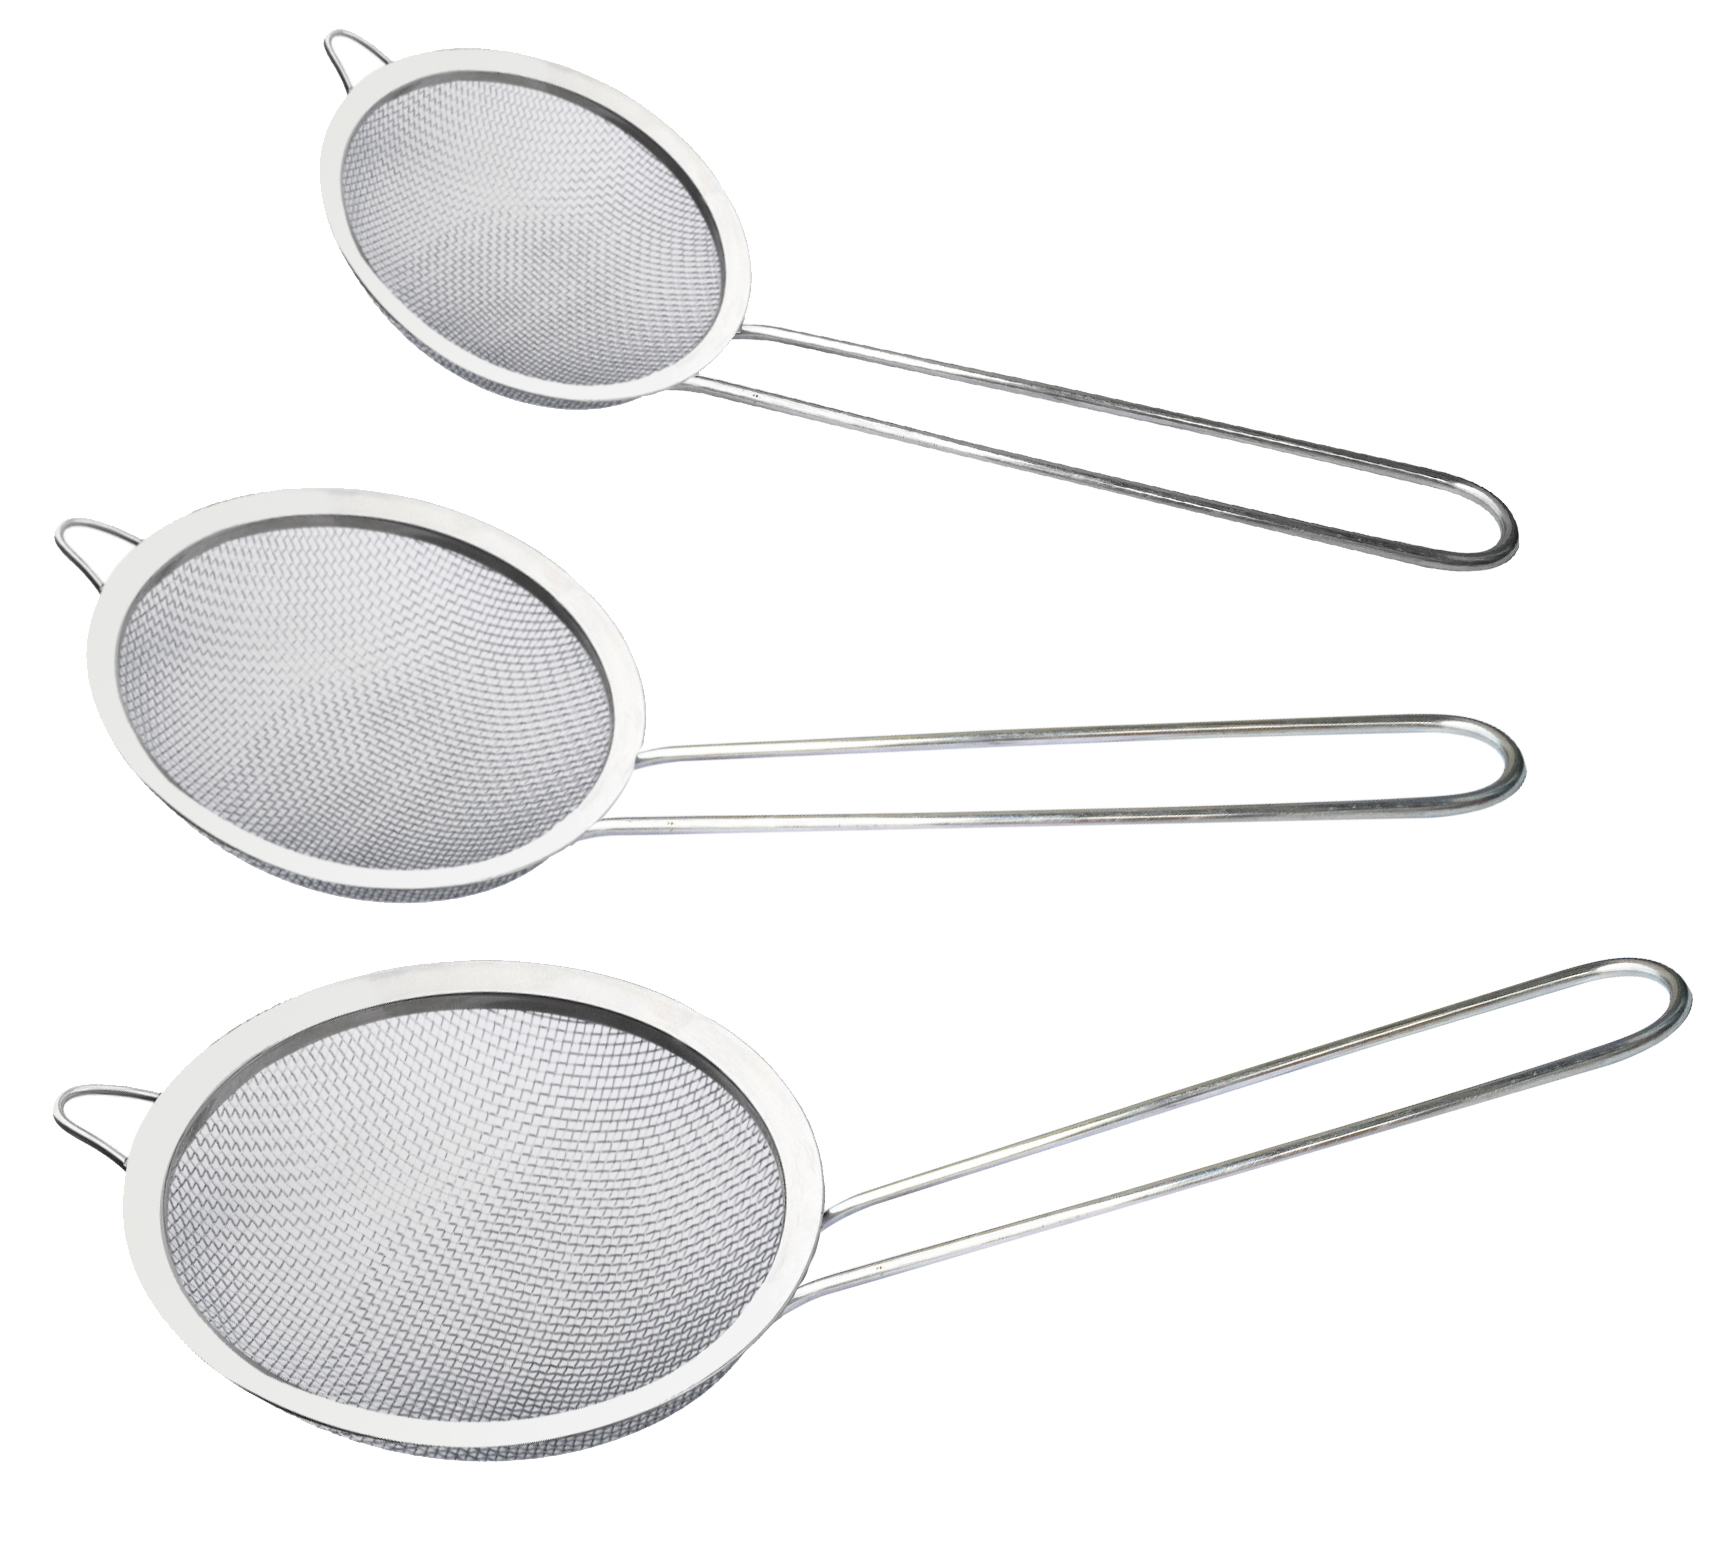 Excellent for Straining Quinoa Pasta 5 & 8 2 Sizes Set Rice Vegetables Fruit NewlineNY Stainless Steel Premium Mesh Strainers with Non-Slip Silicone Handles Nut Milk and Similar 